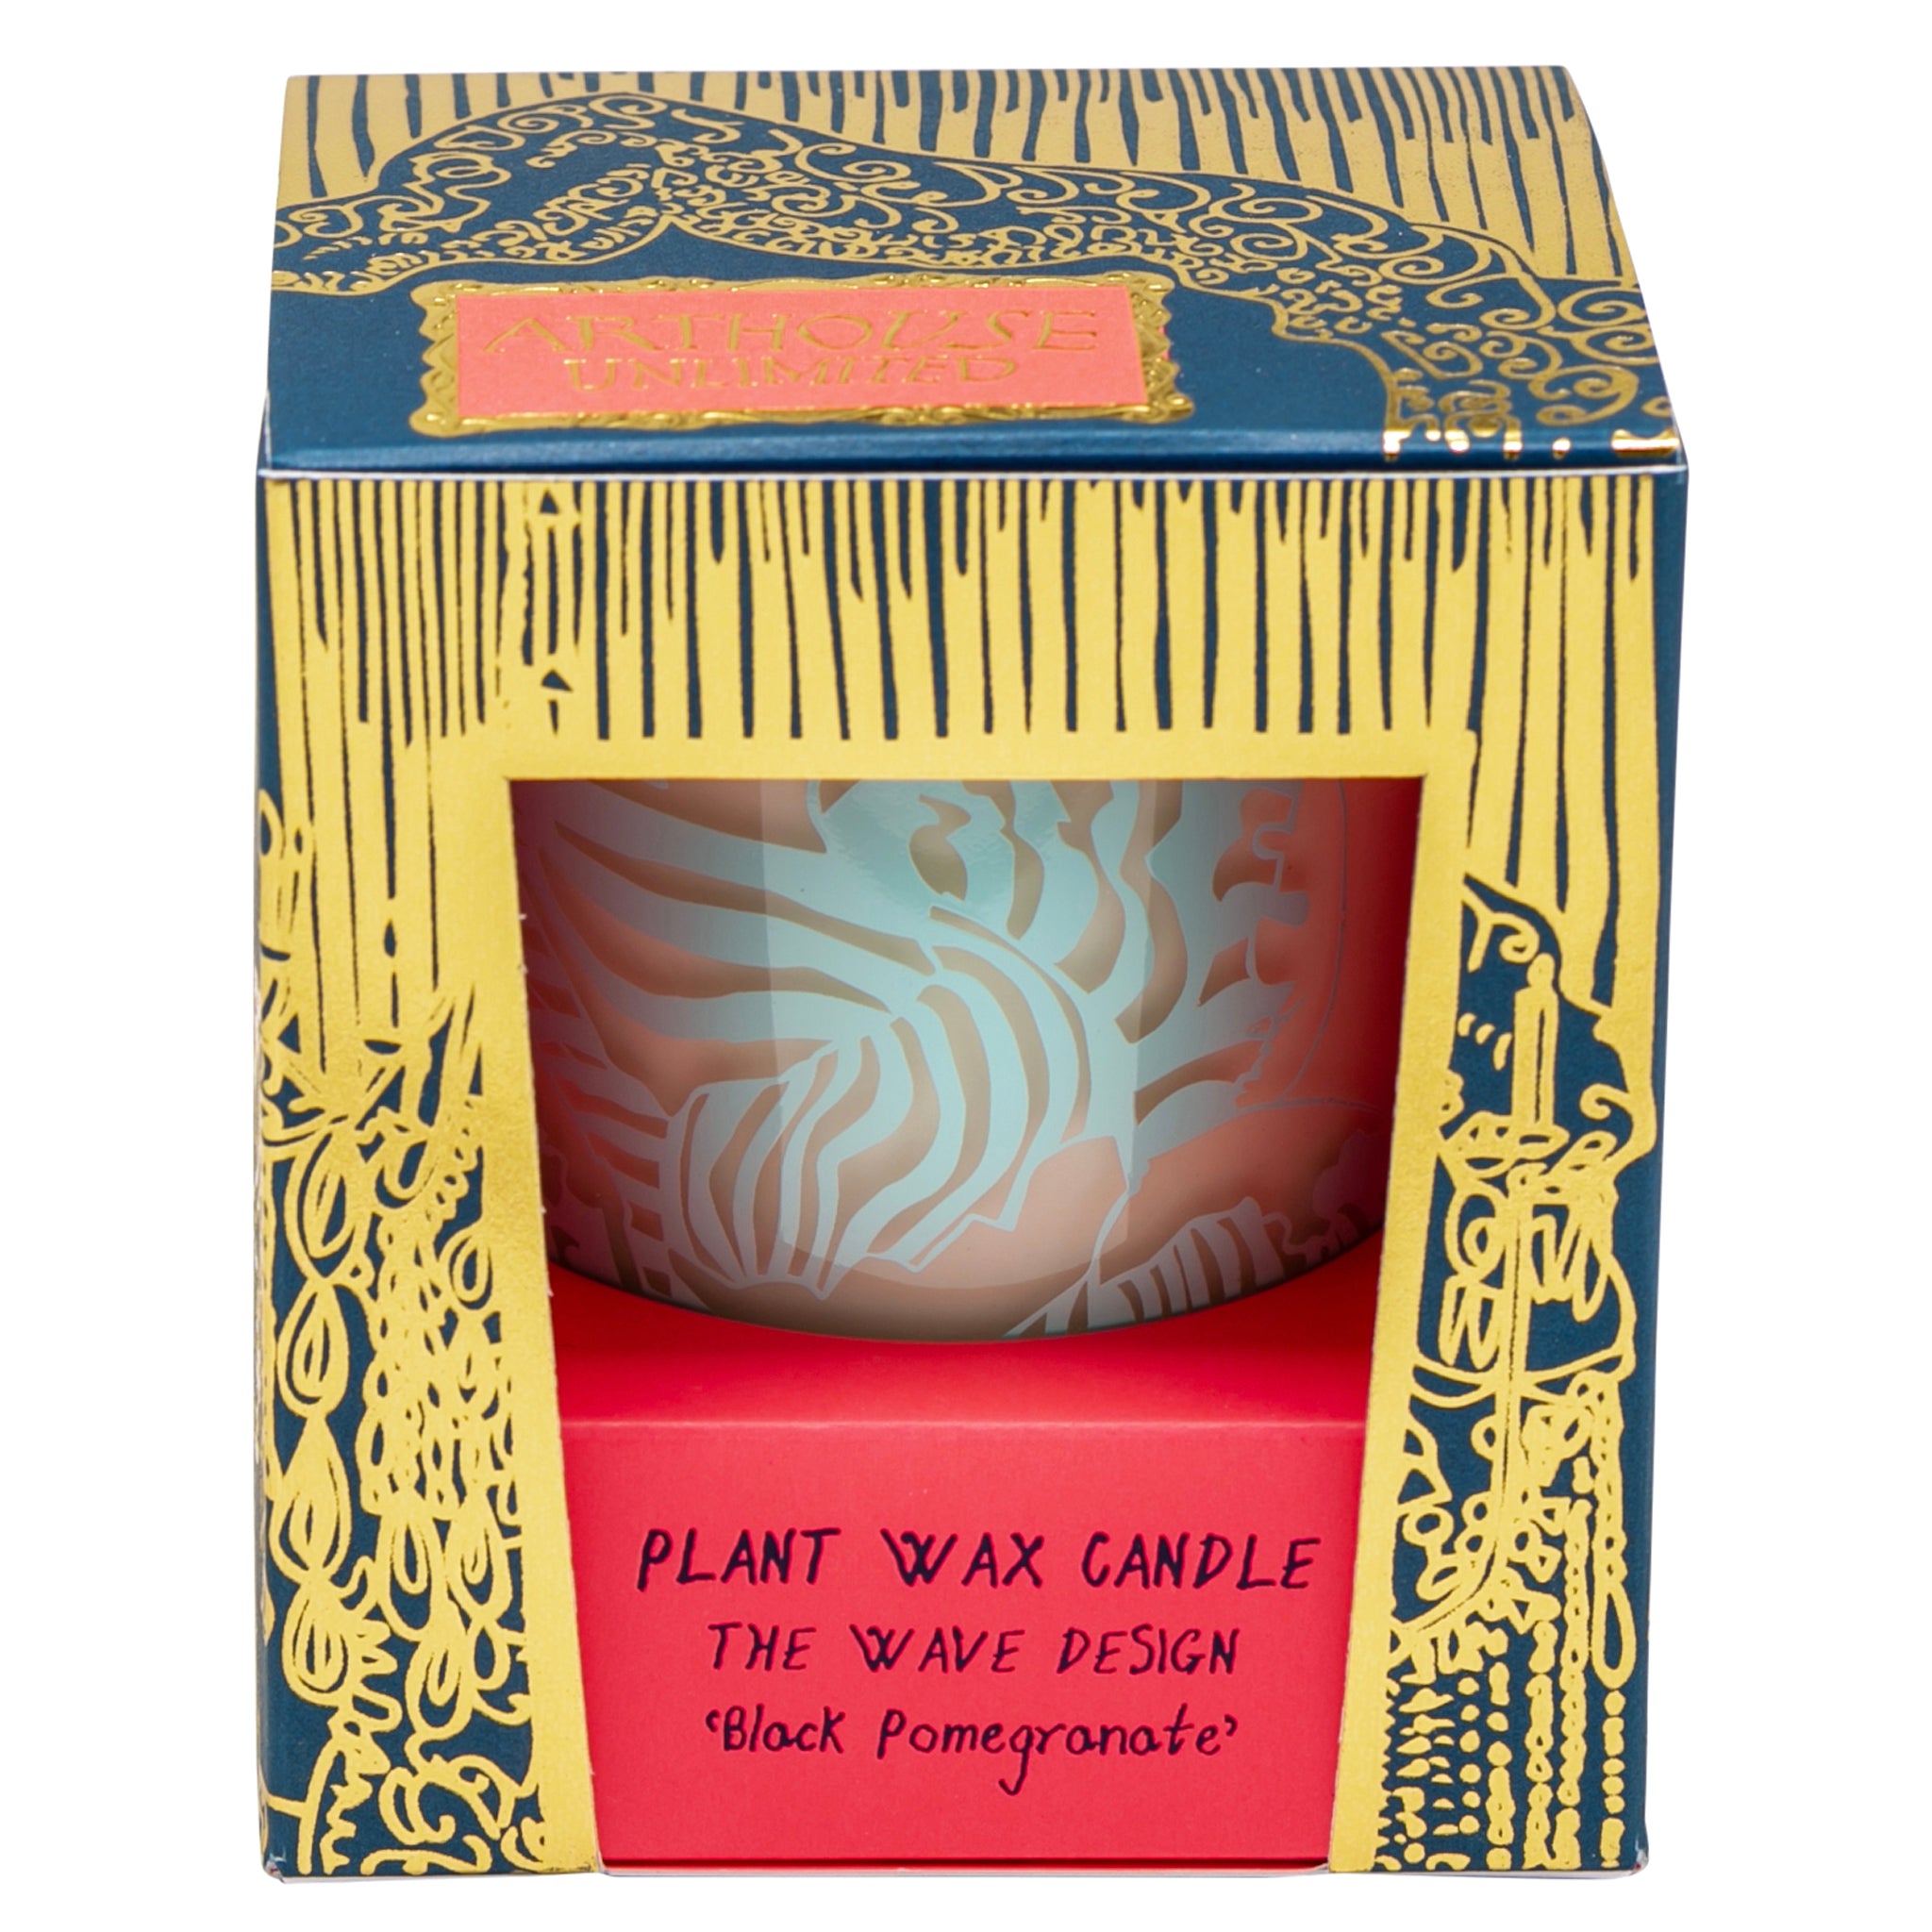 The Wave, Black Pomegranate Splash Scented Plant Wax Candle in blue pink and gold box